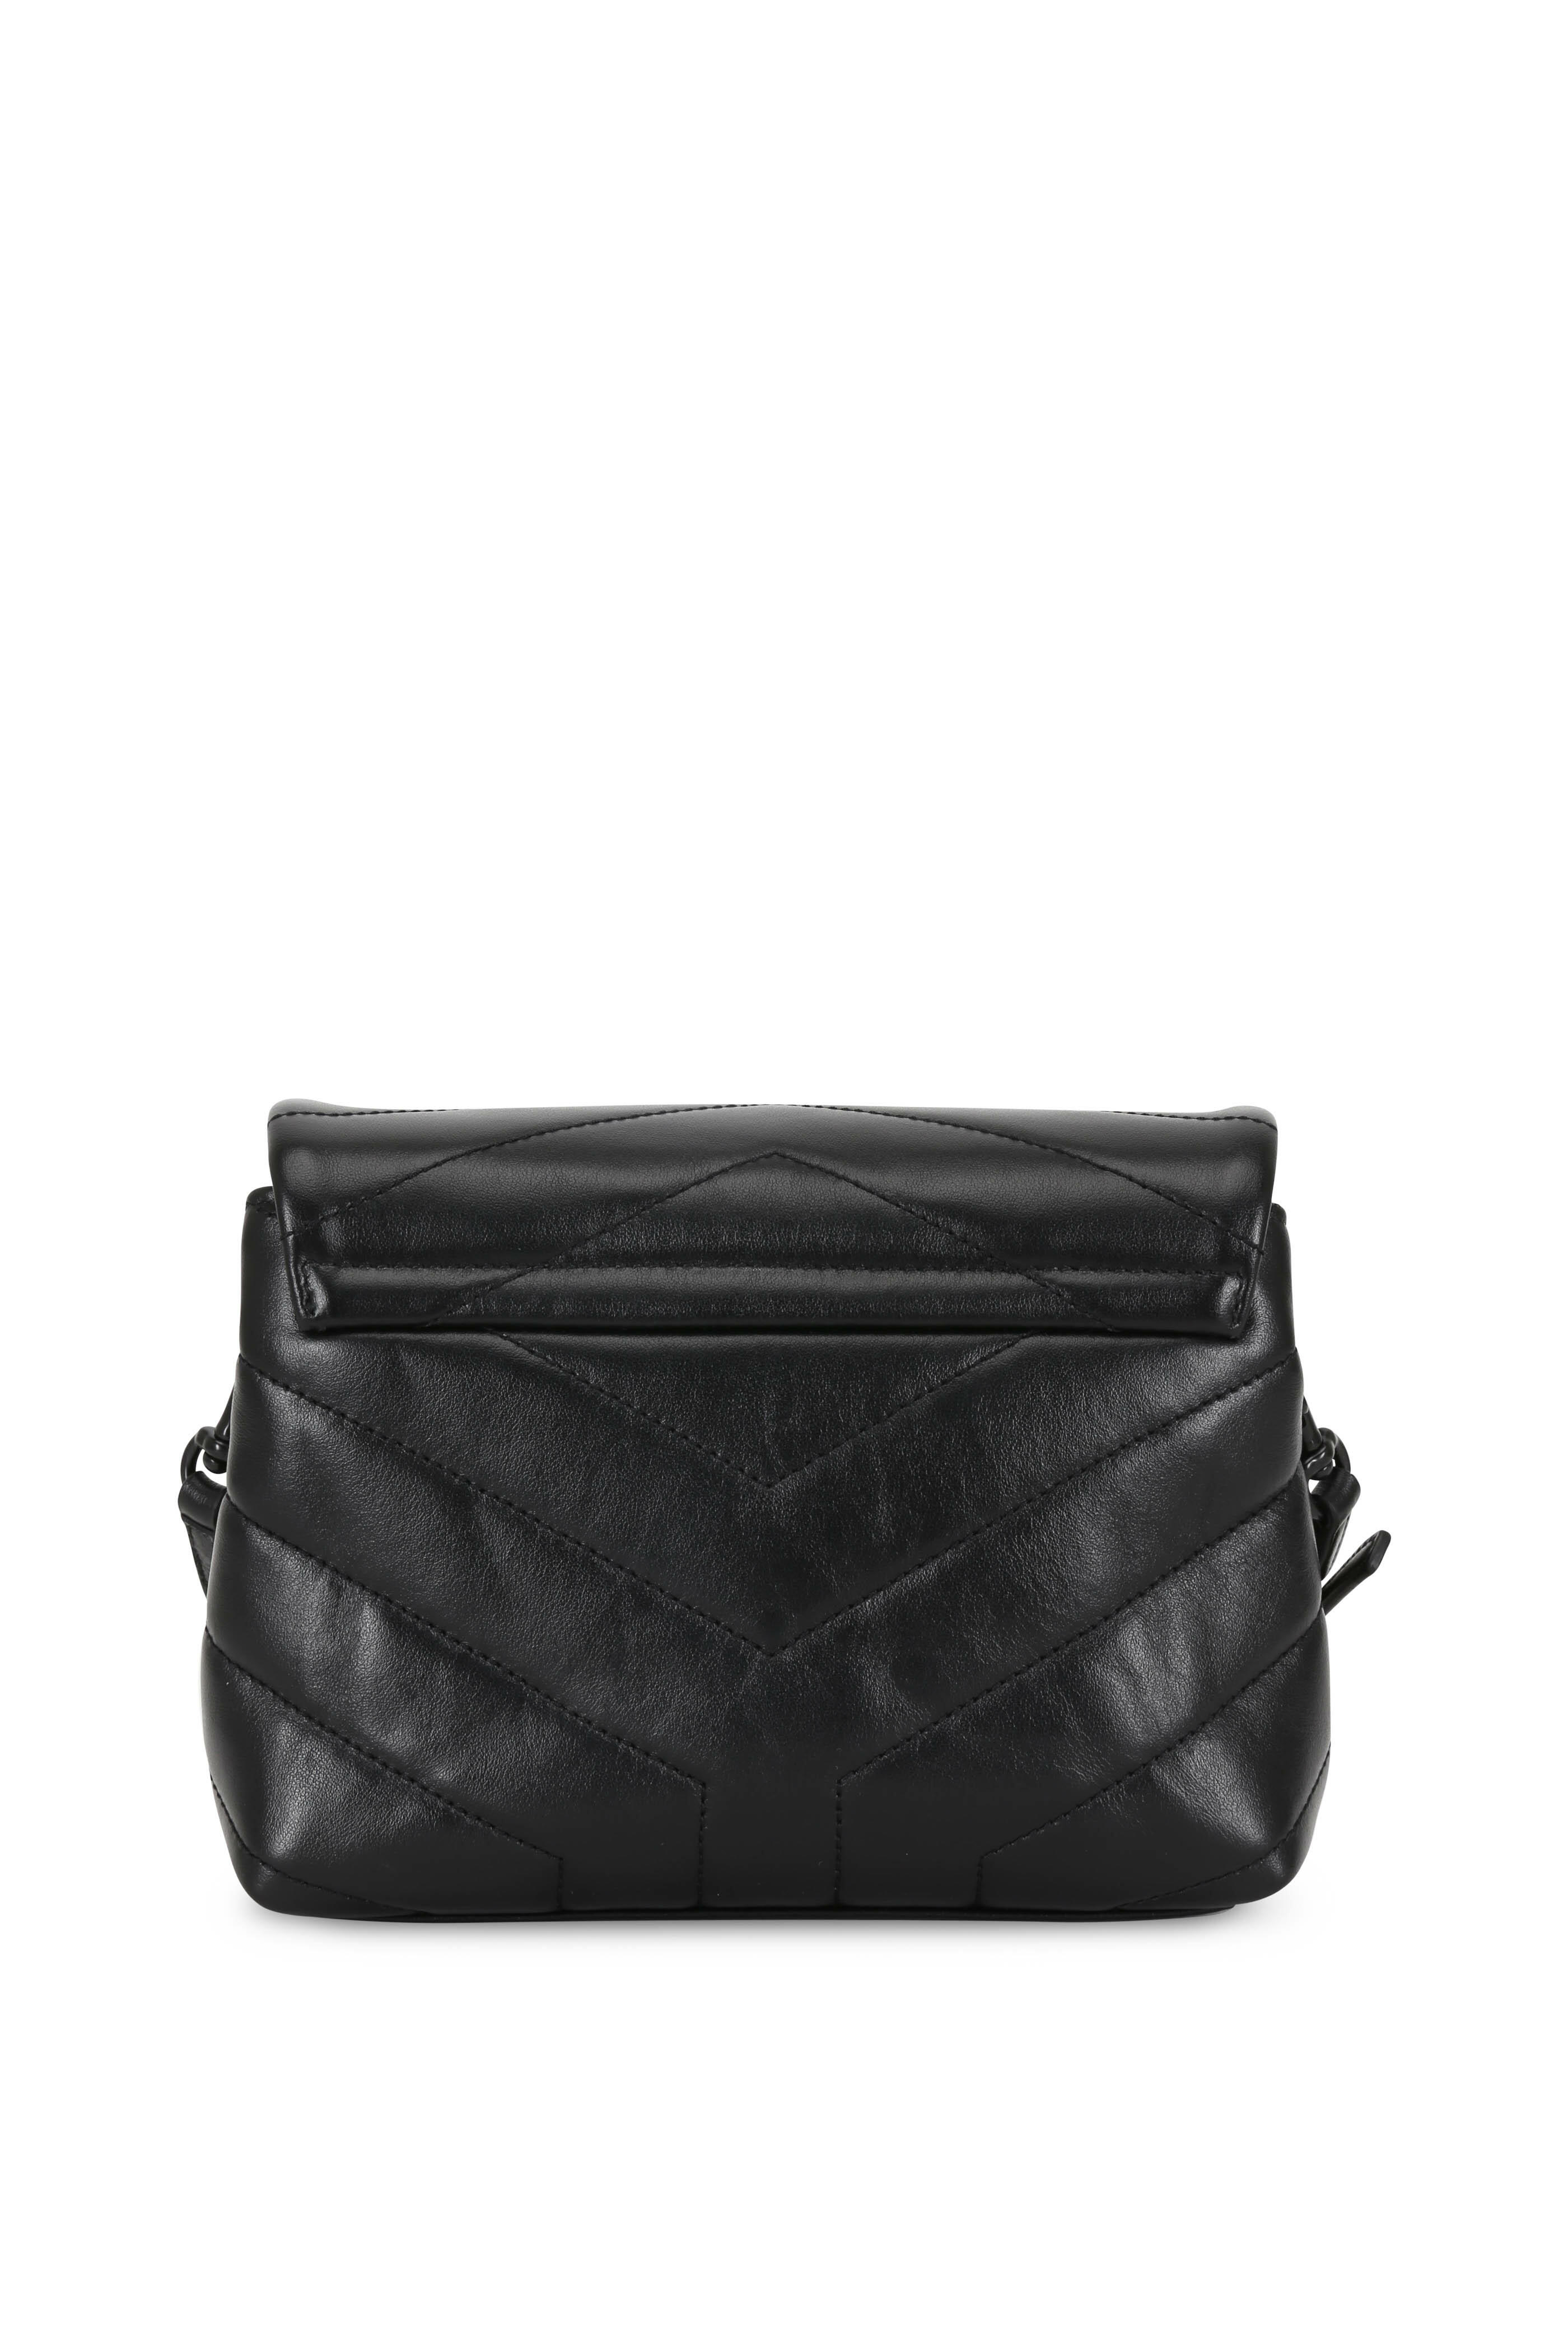 Green Loulou Toy quilted-leather cross-body bag, Saint Laurent